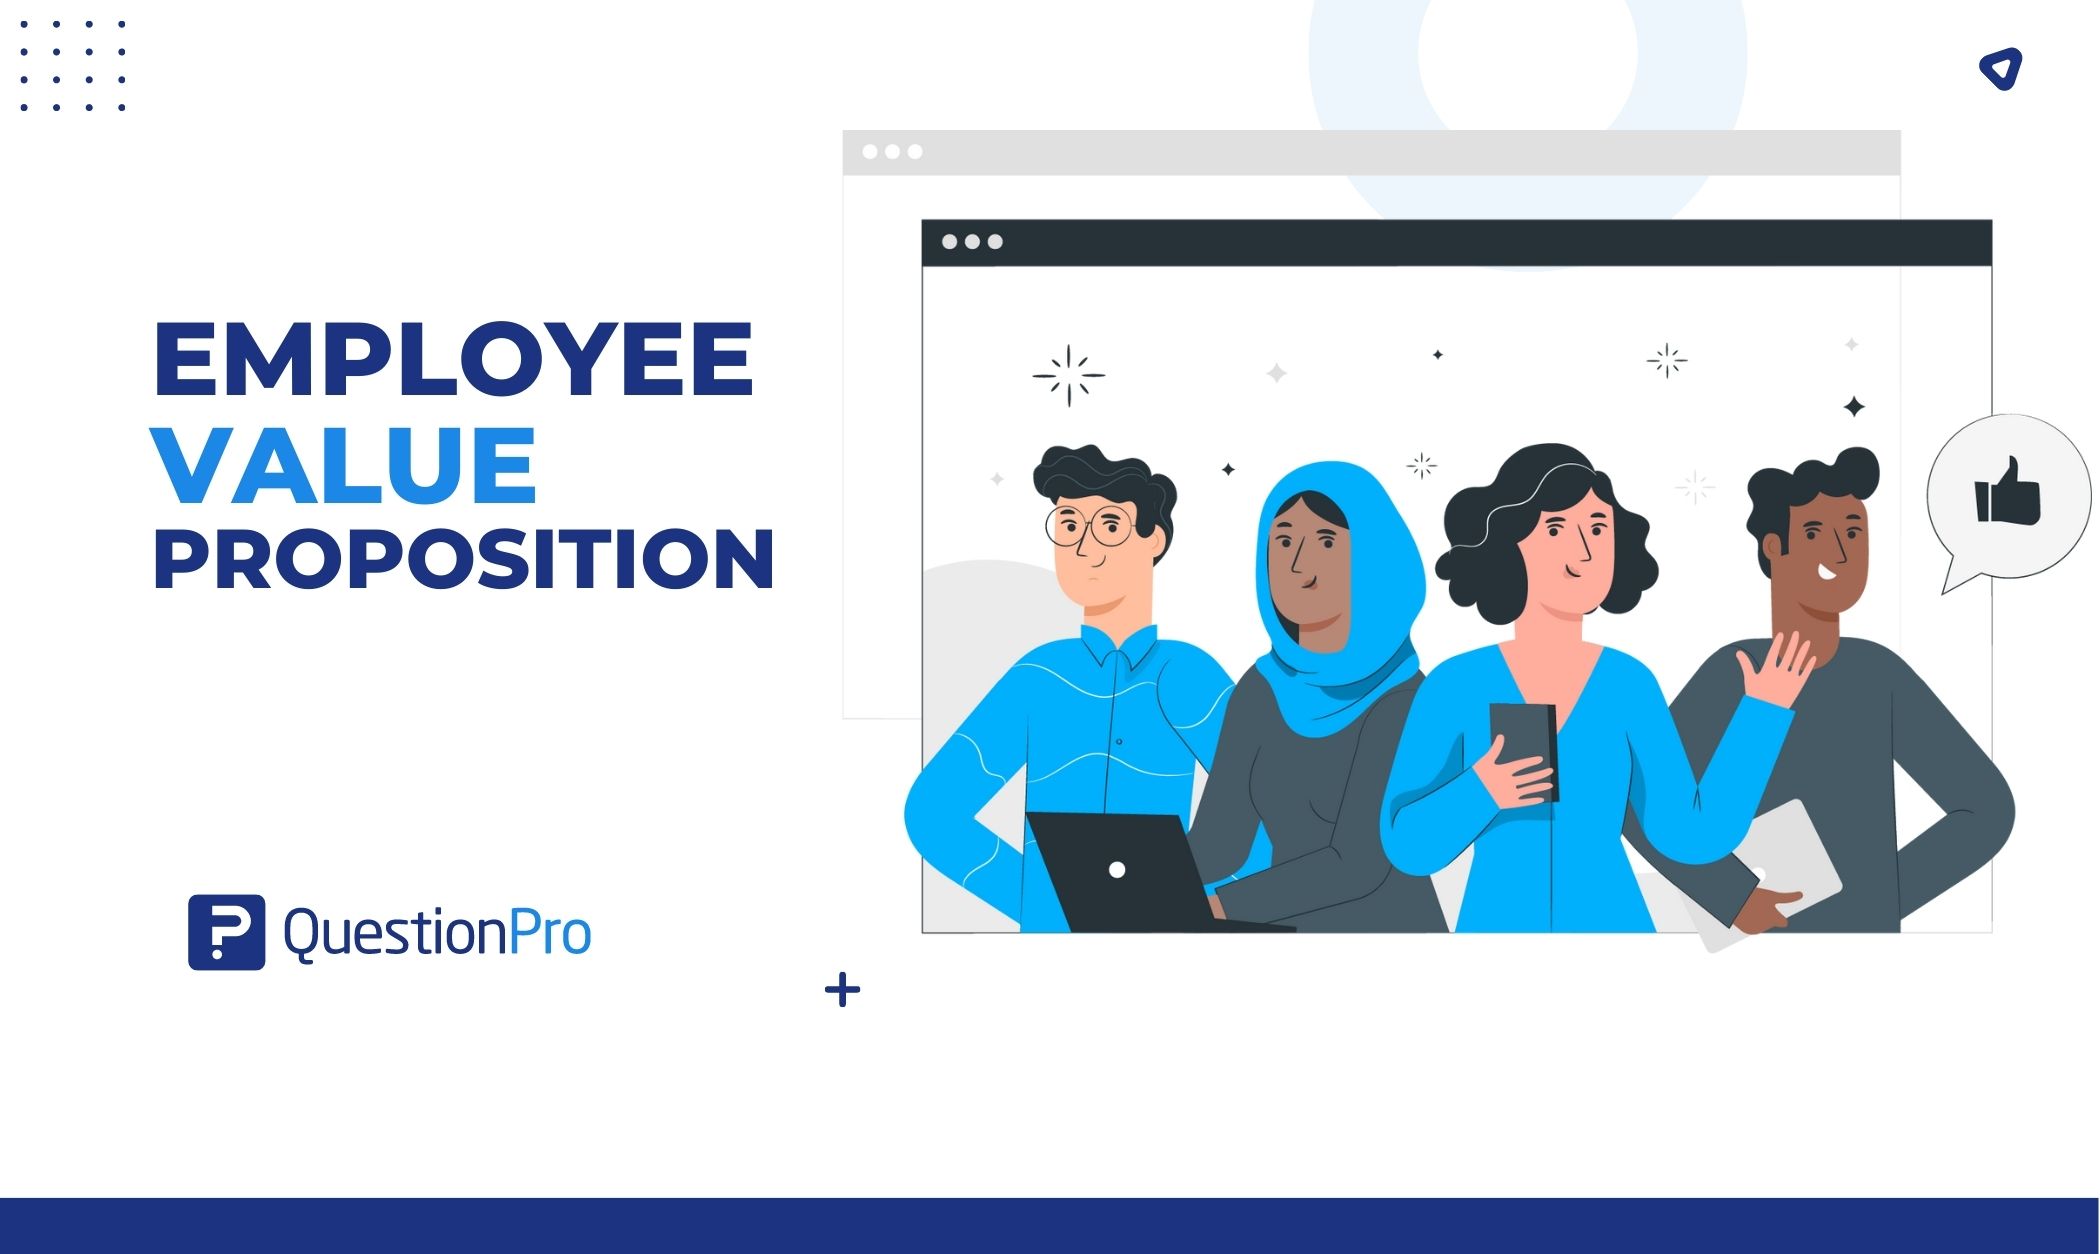 A strong employee value proposition includes a complete list of benefits. It reduces financial load and improve employee satisfaction.